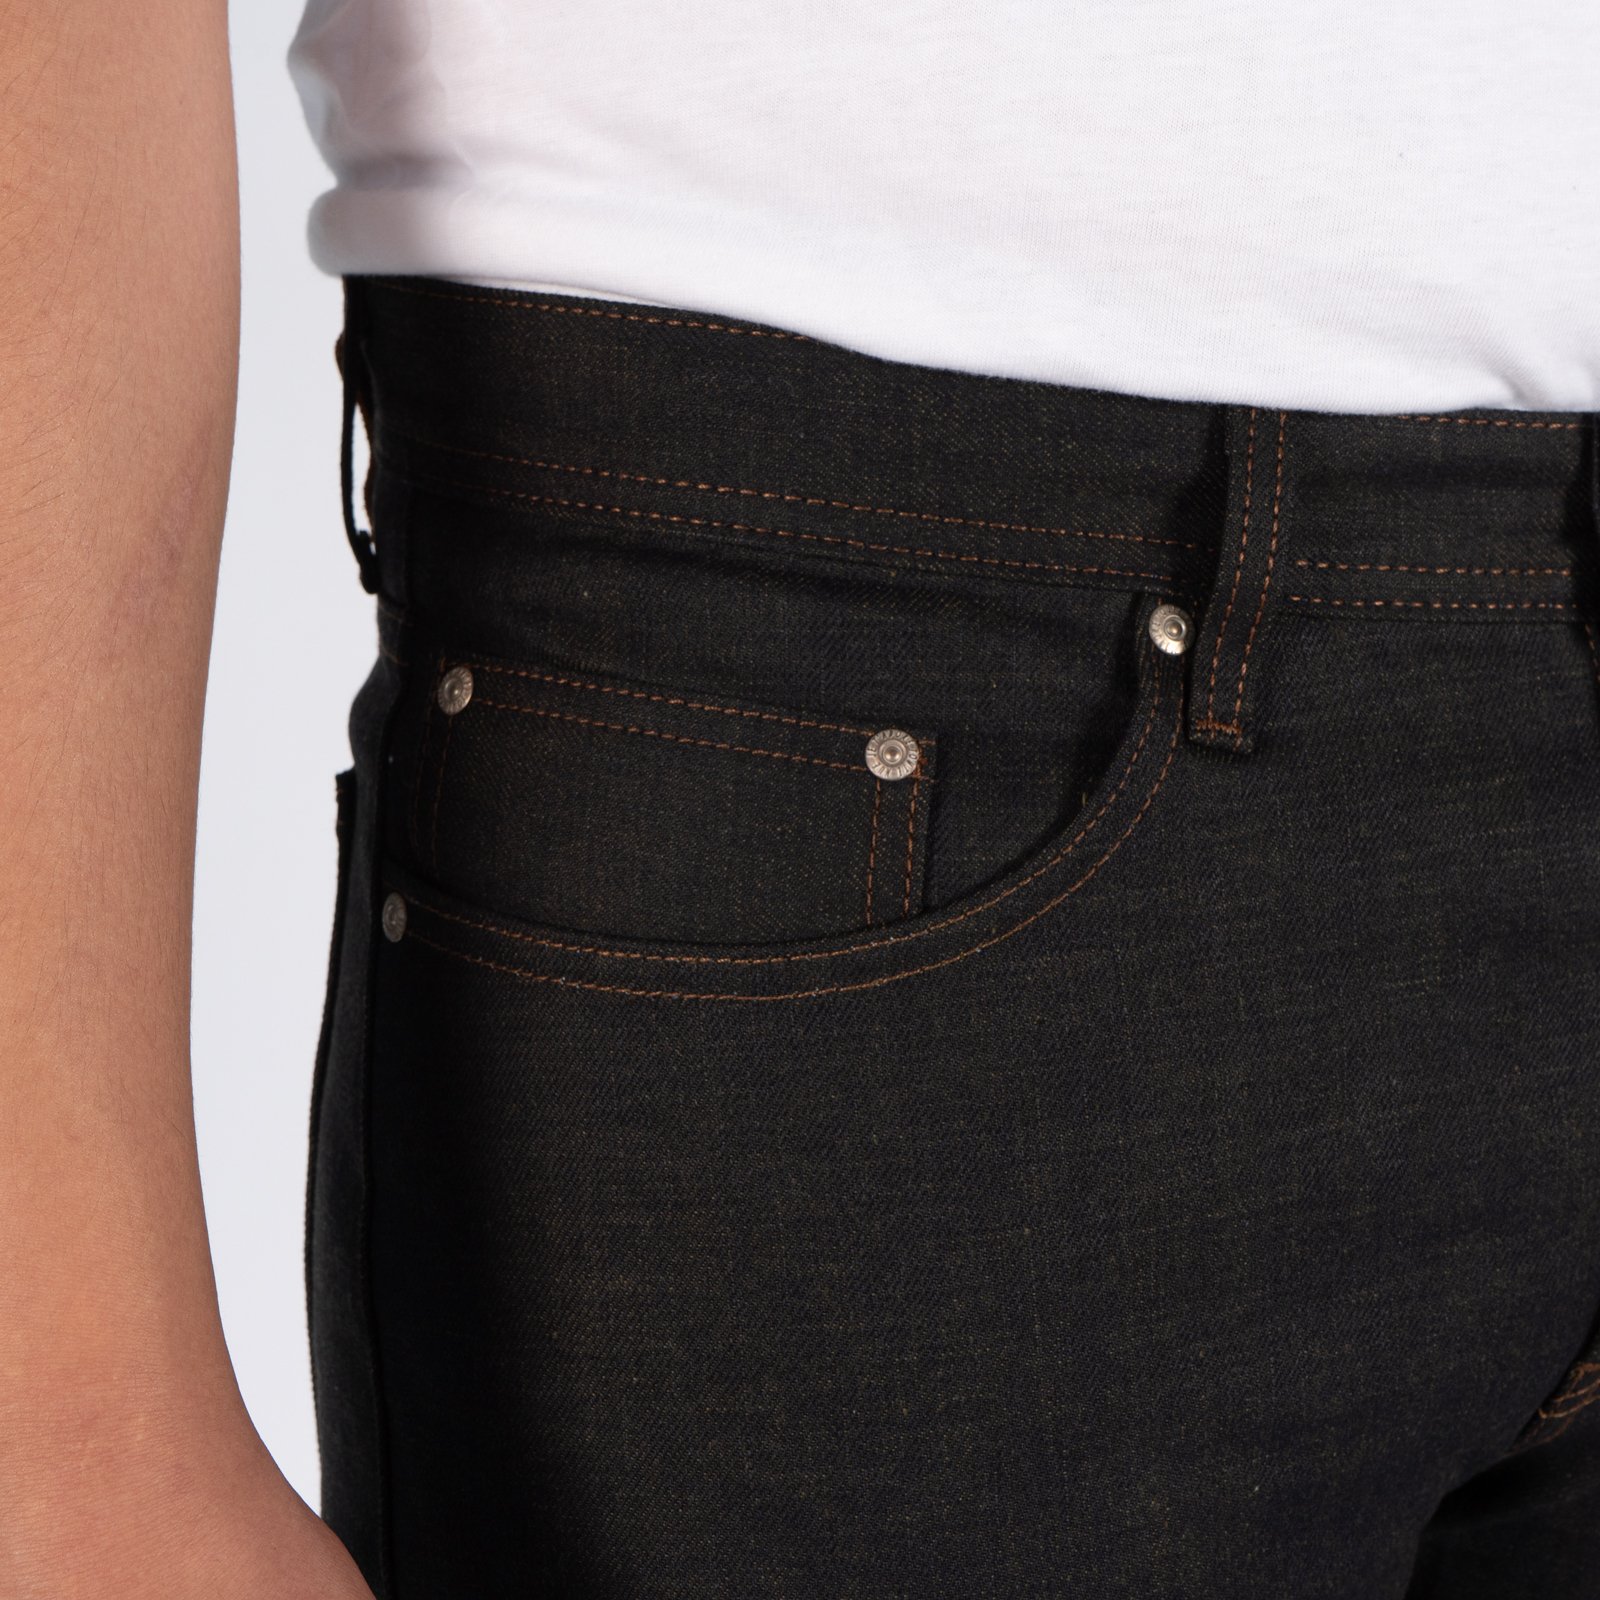  Catechu Selvedge jeans - coin pocket 